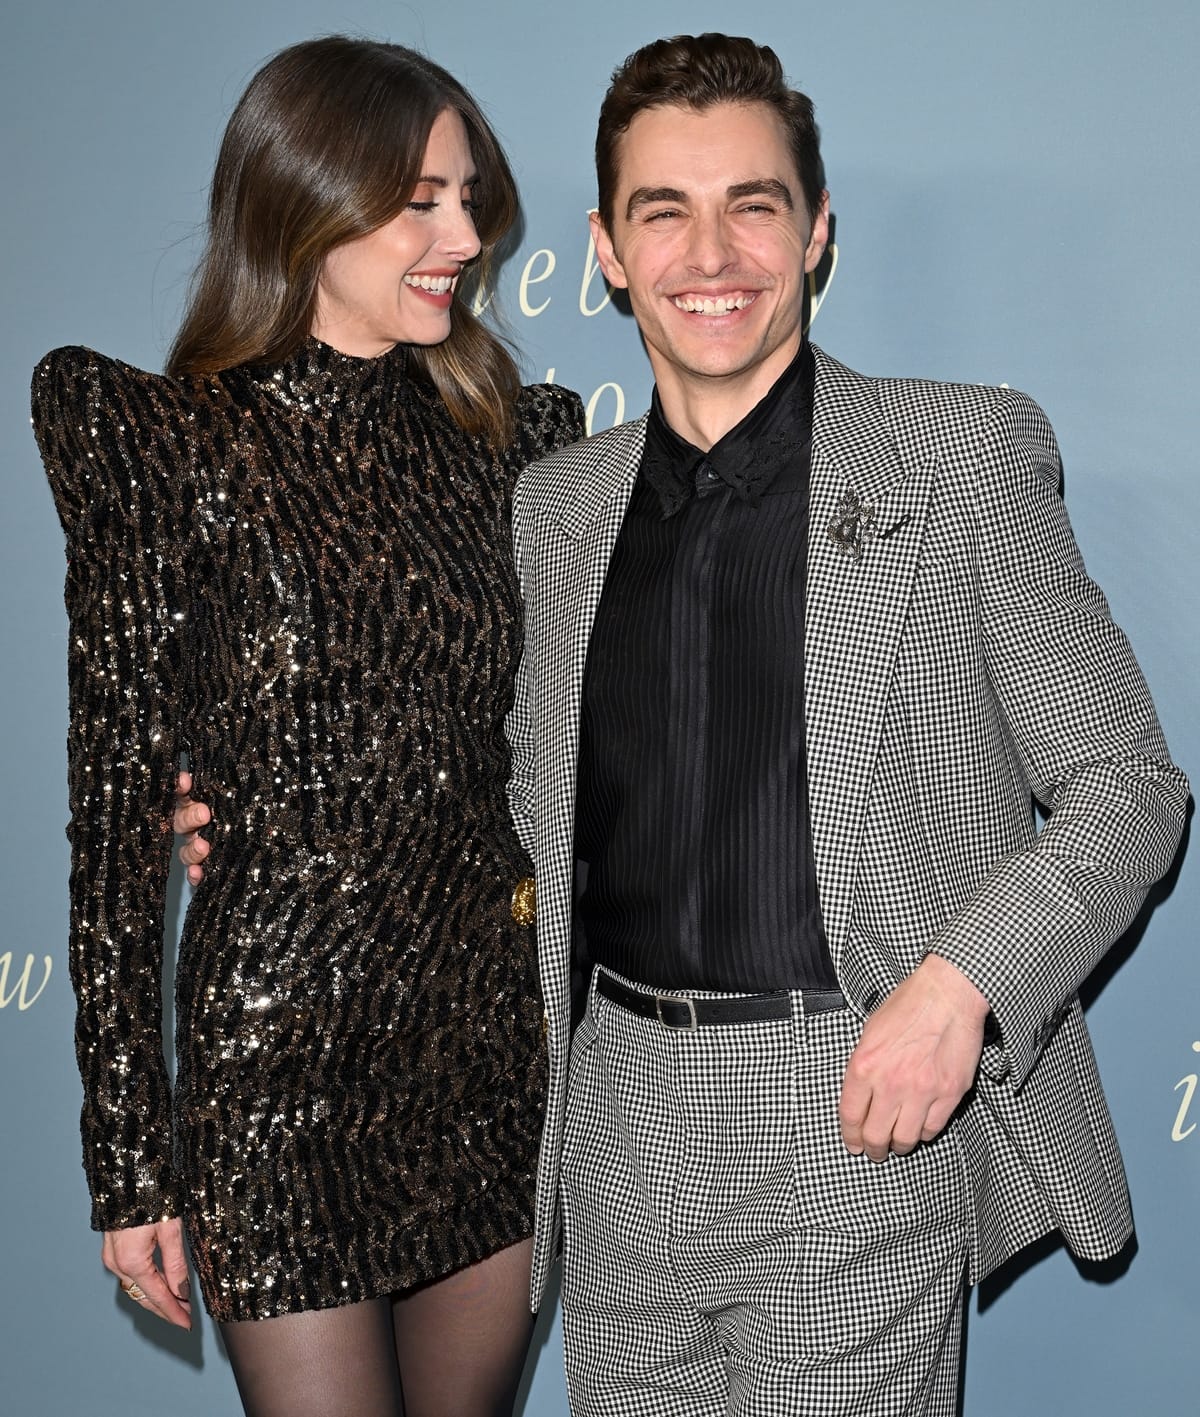 Alison Brie, at 5 feet 3 inches (160 cm), and Dave Franco, at 5 feet 5 ¾ inches (167 cm), display a subtle height difference of 2 ¾ inches (7 cm), which is often visually minimized in public appearances, especially when Brie chooses to wear high heels